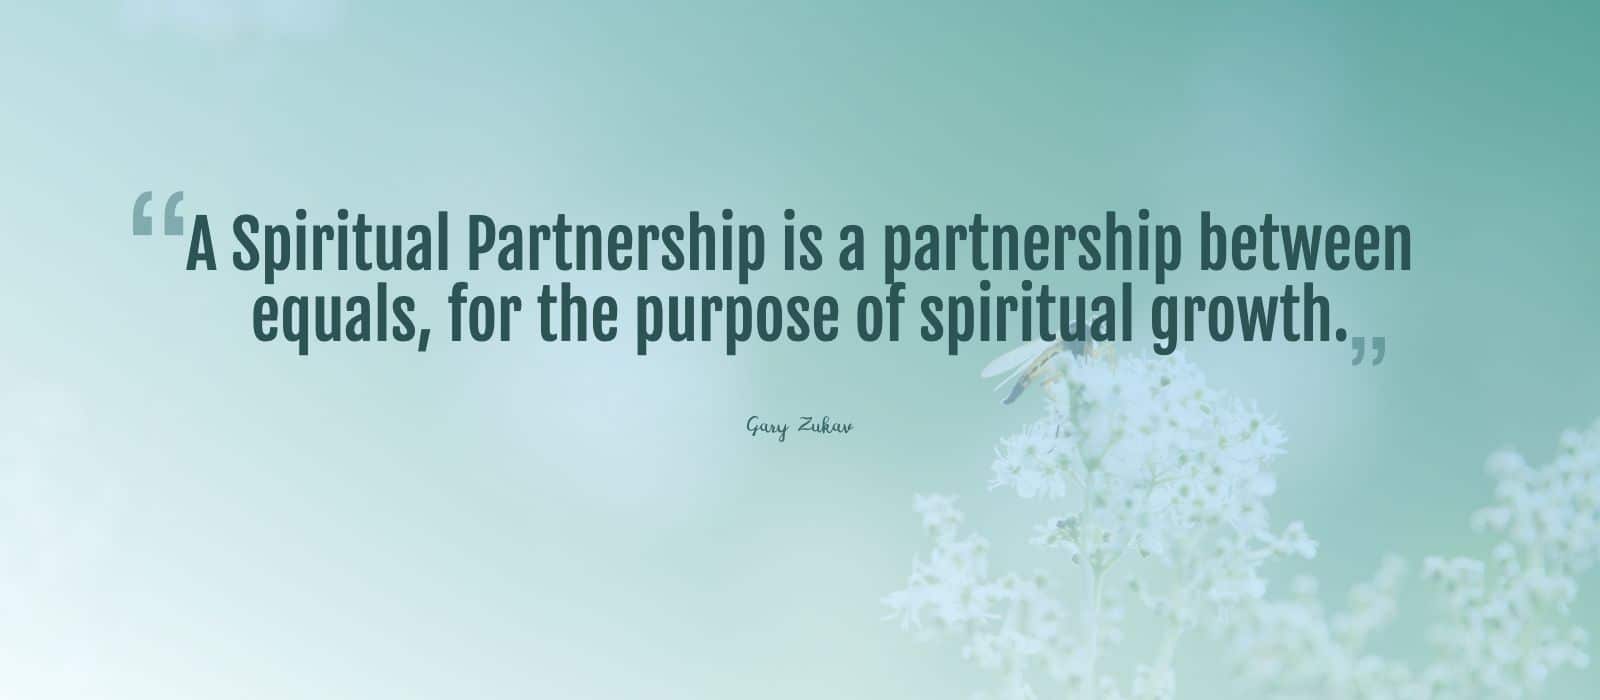 You are currently viewing How To Have a Spiritual Partnership: Guidelines from Gary Zukav